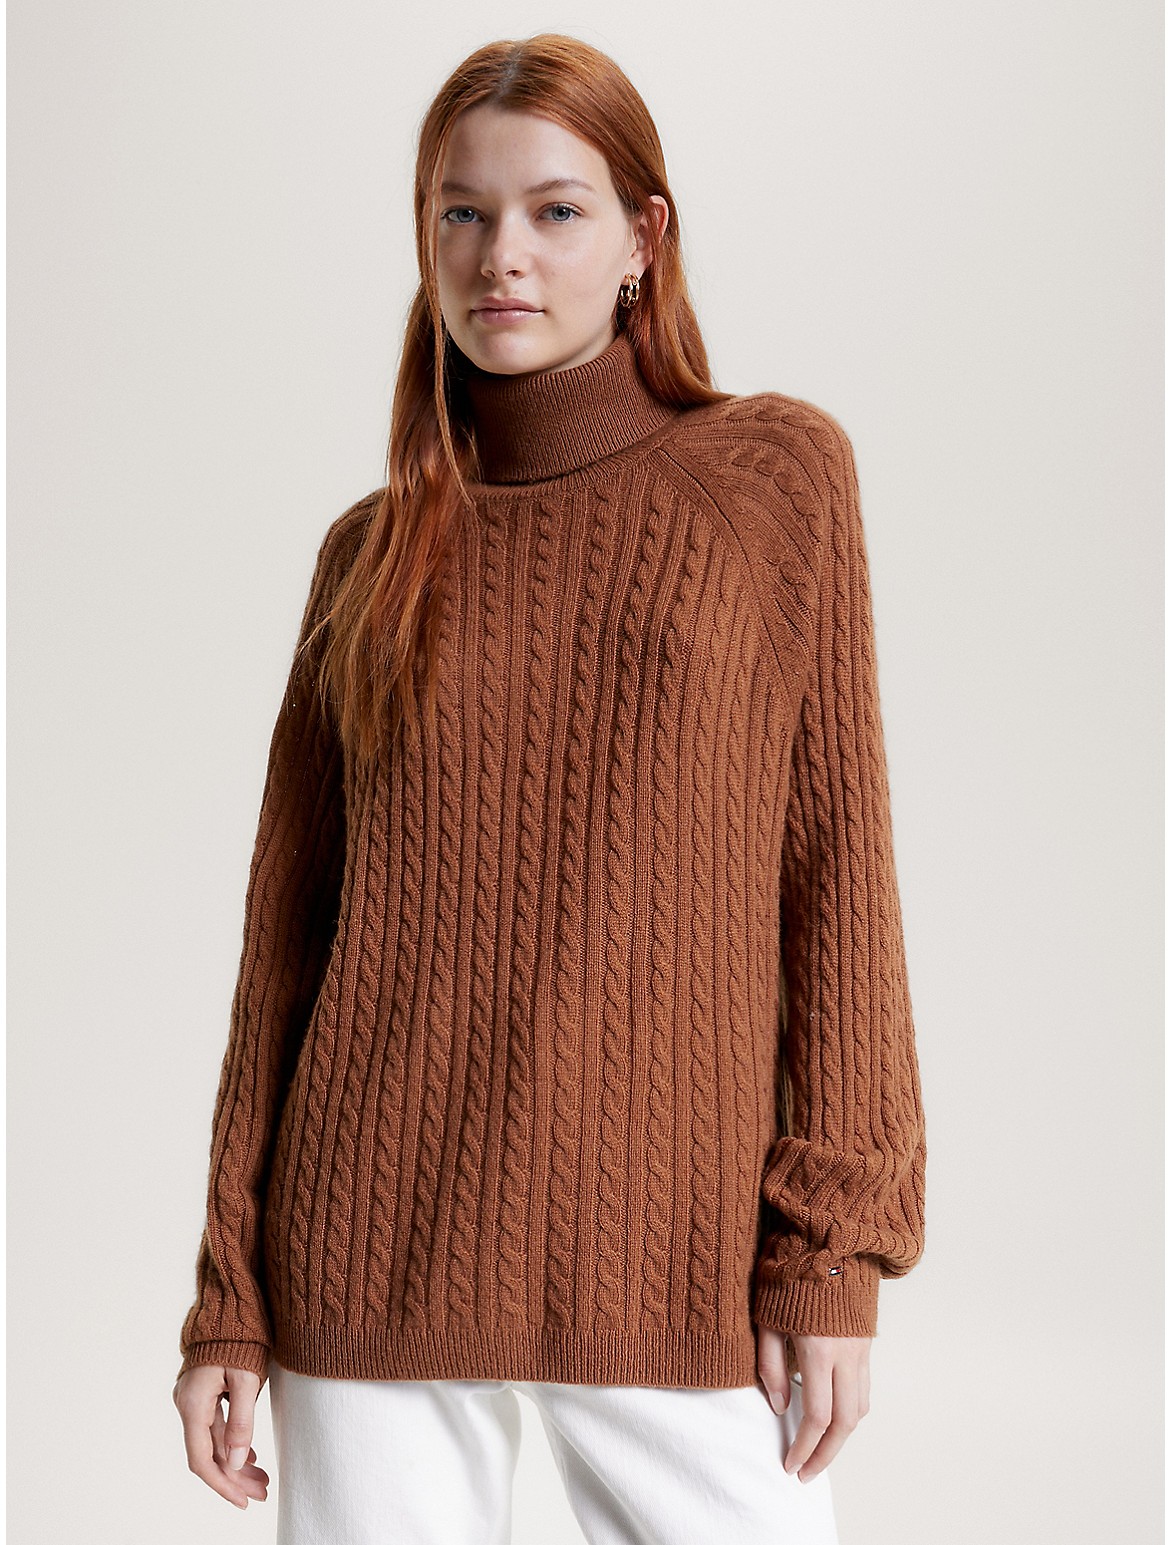 Tommy Hilfiger Women's Wool Cable Knit Turtleneck Sweater